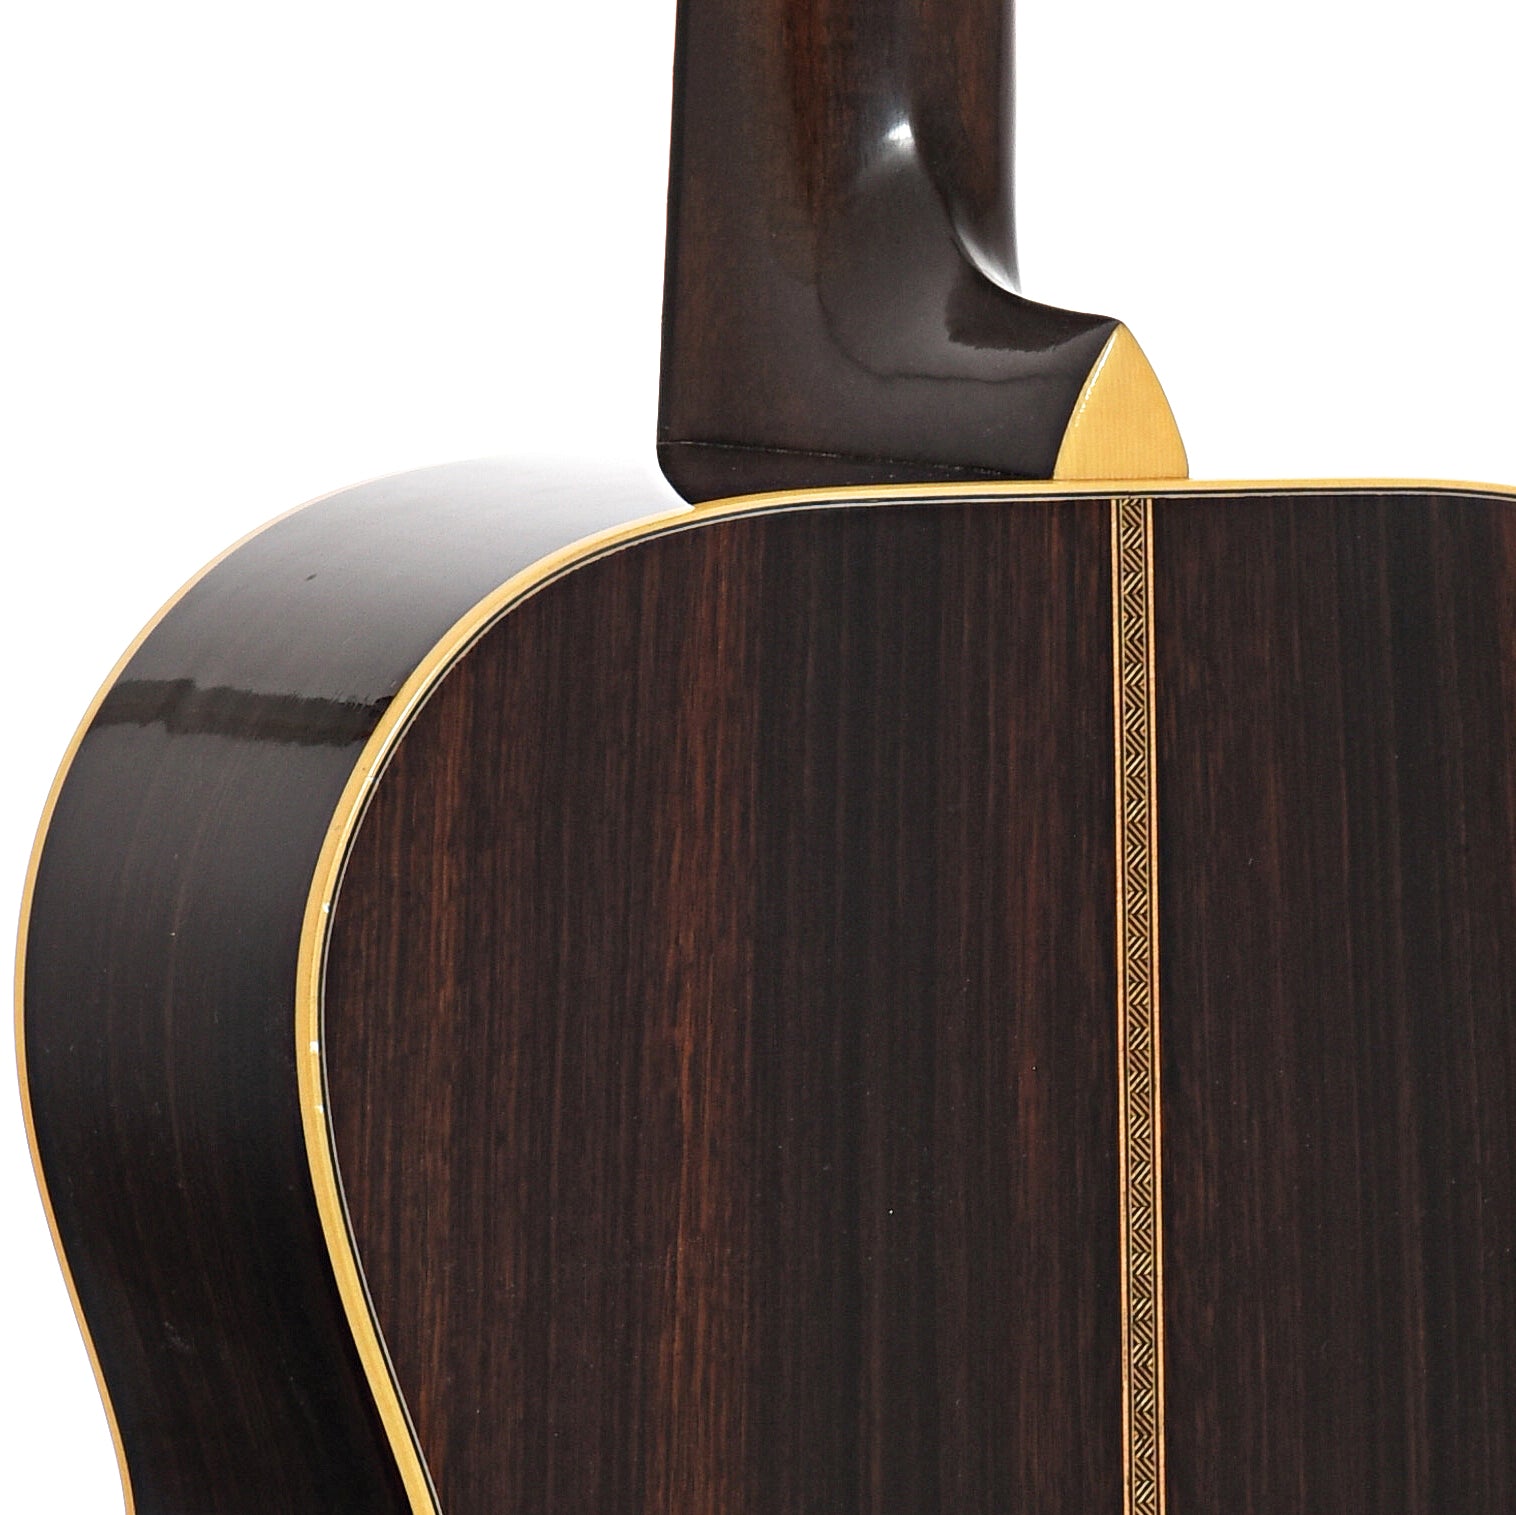 Heel of Pre-War Guitar Co. Double Aught (00) Old-Growth Indian Rosewood, Iced-Tea Burst, Level 2 Aging Acoustic